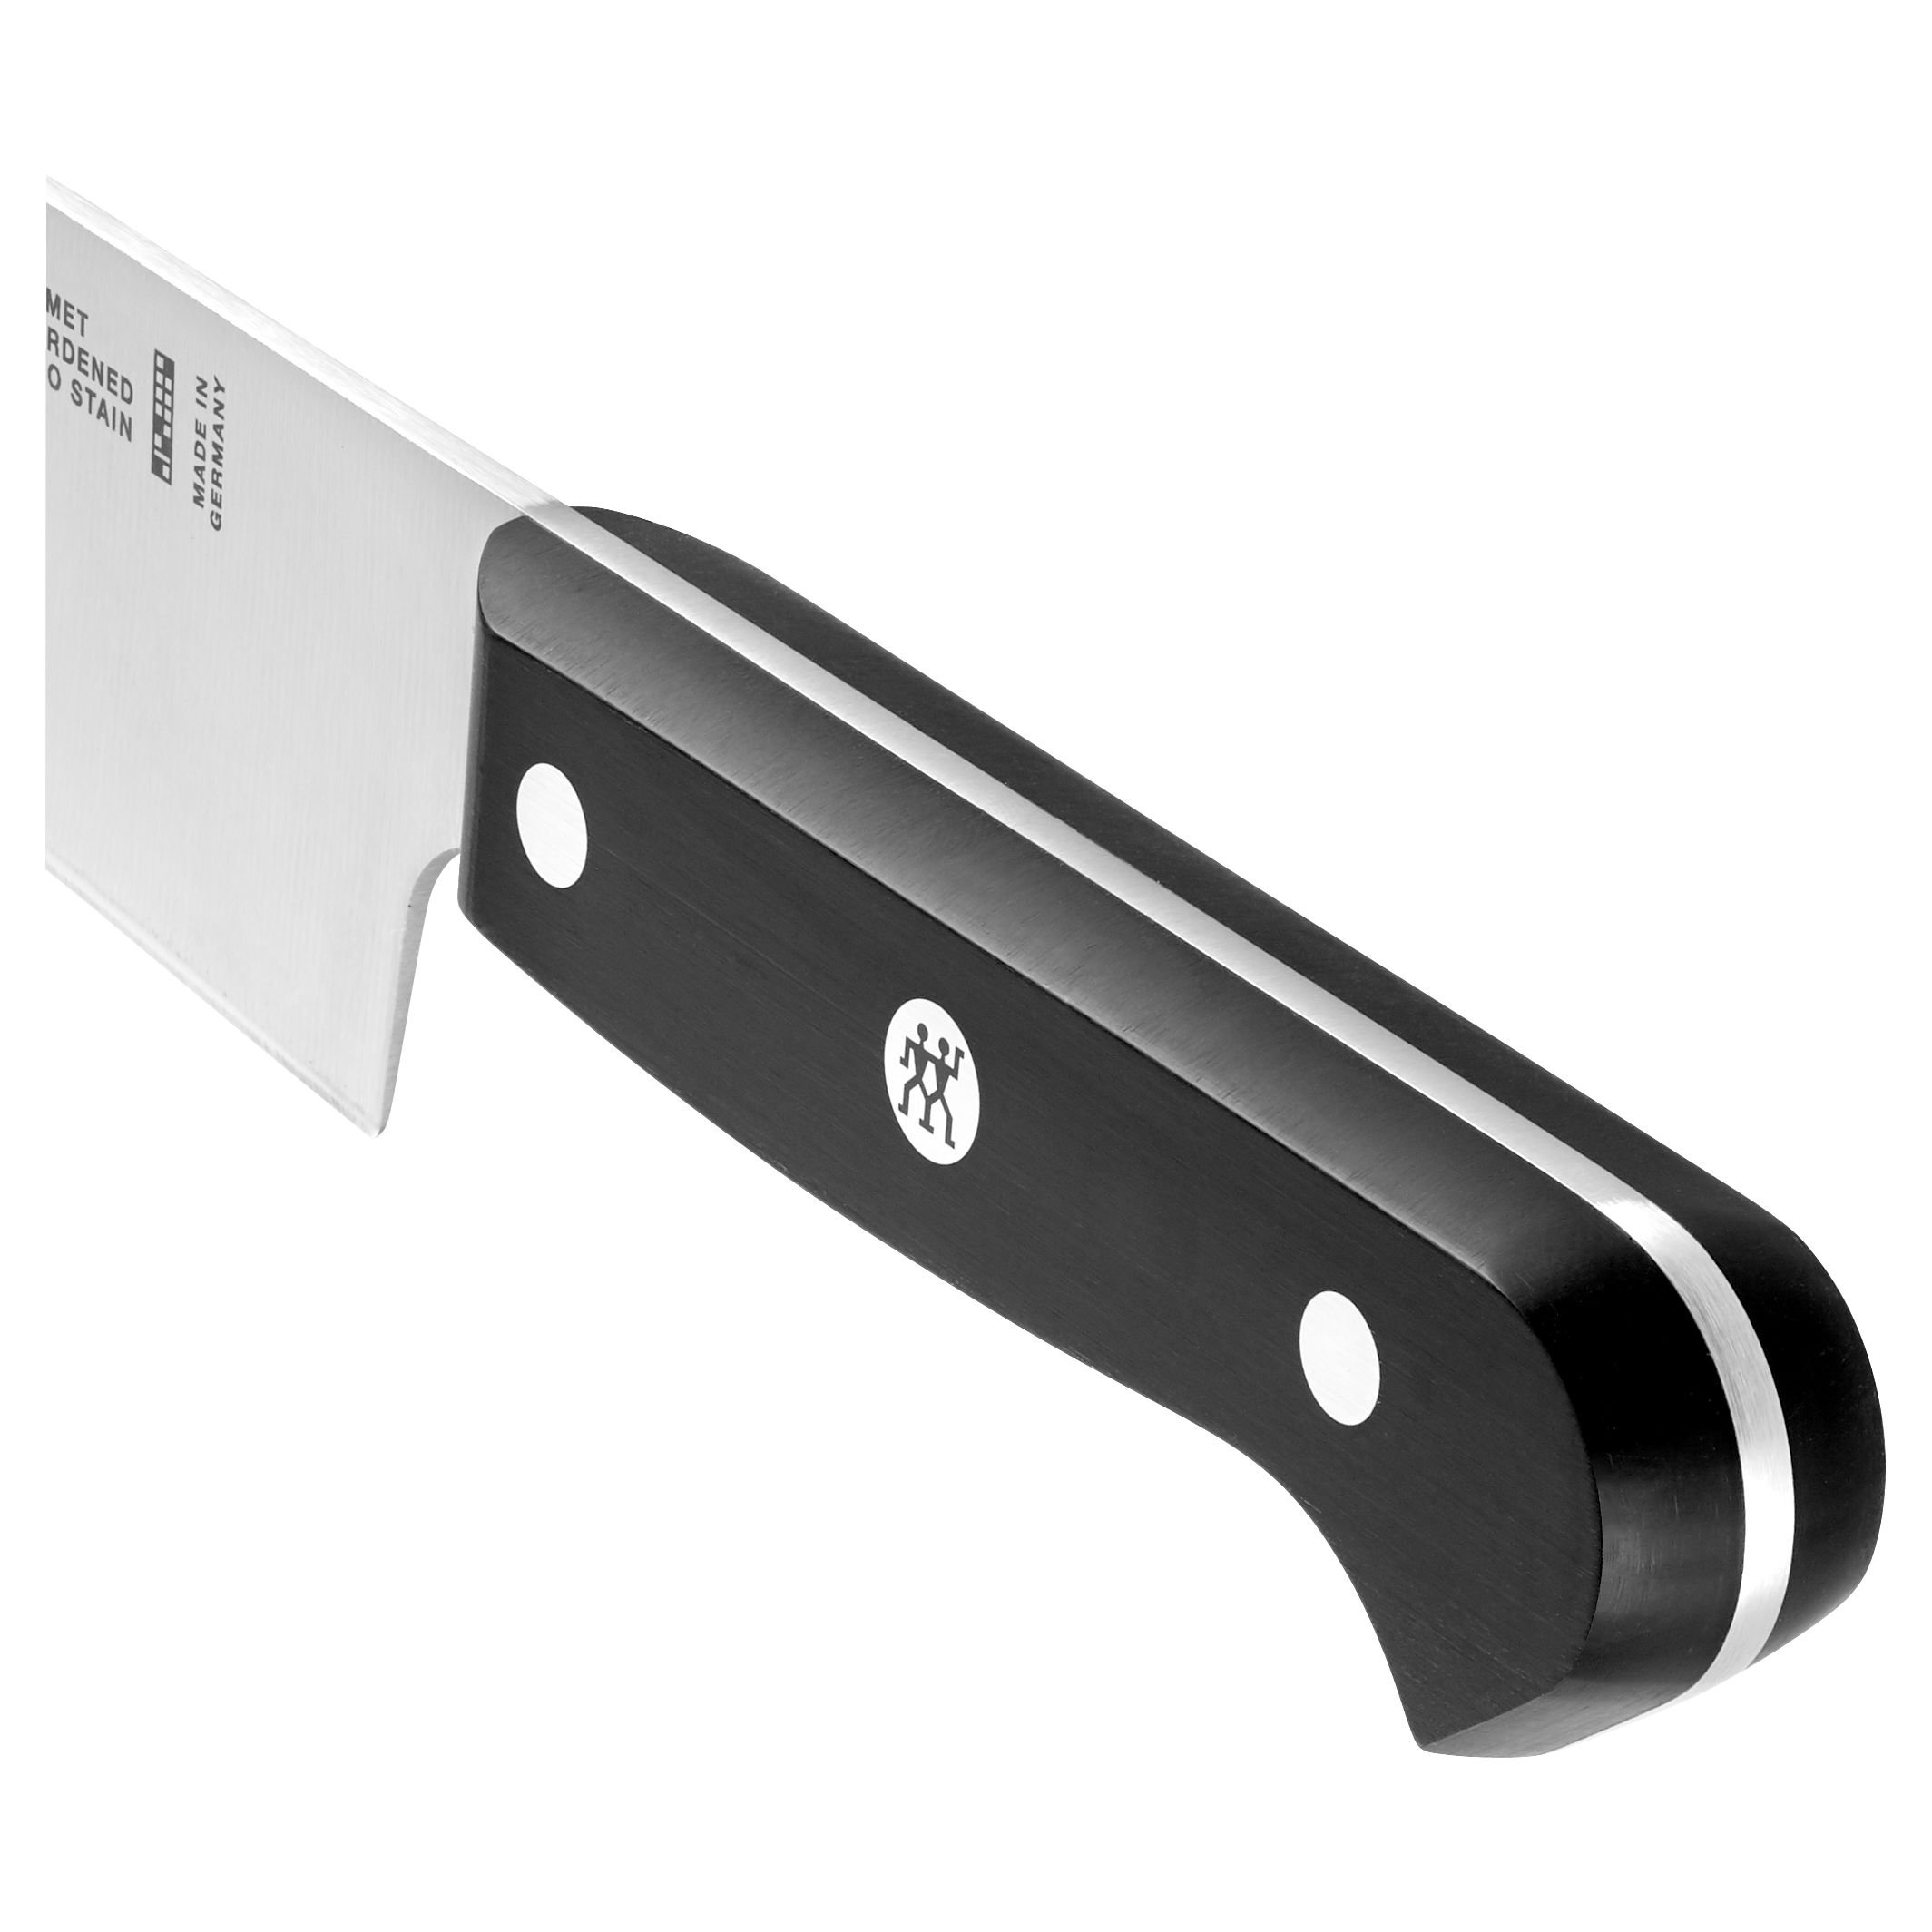 ZWILLING J.A. Henckels Zwilling Gourmet 8-inch Chef's Knife & Reviews